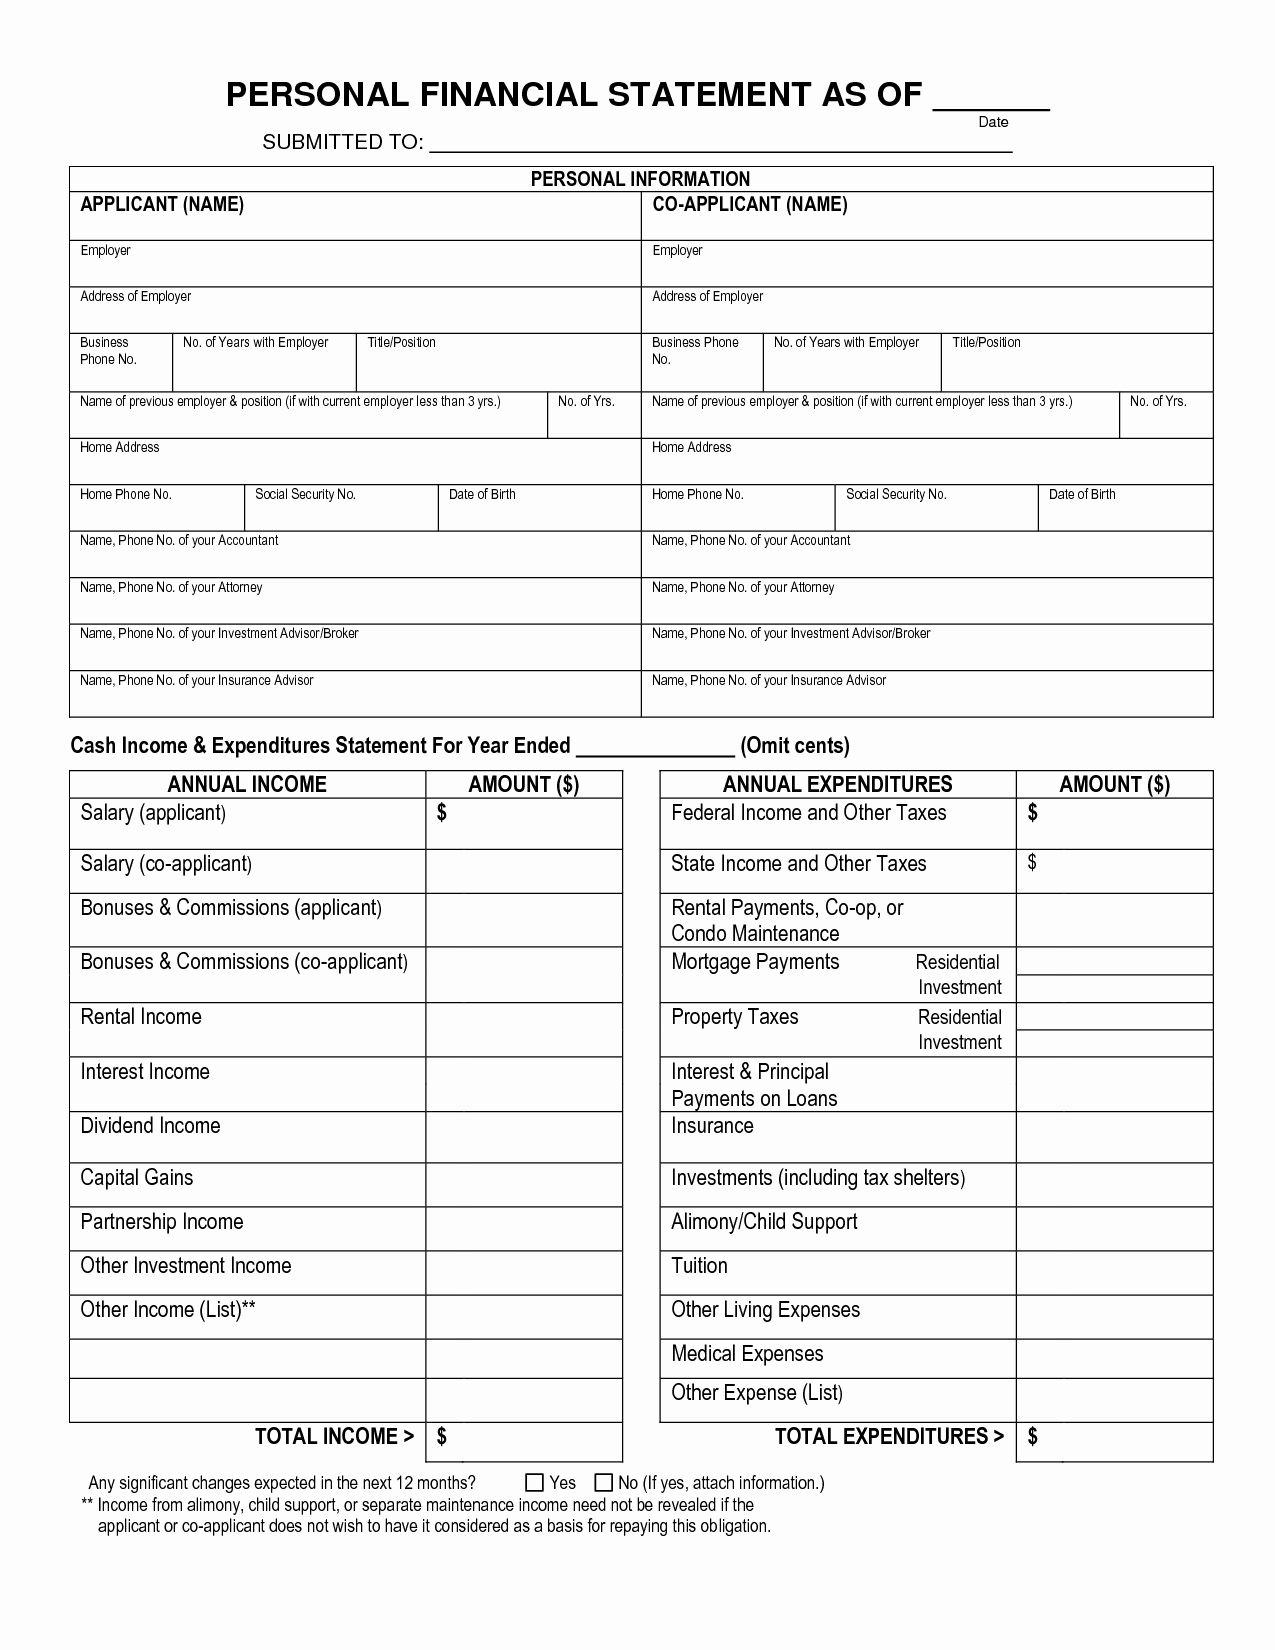 Fillable Personal Financial Statement Awesome Free Printable Personal Financial Statement